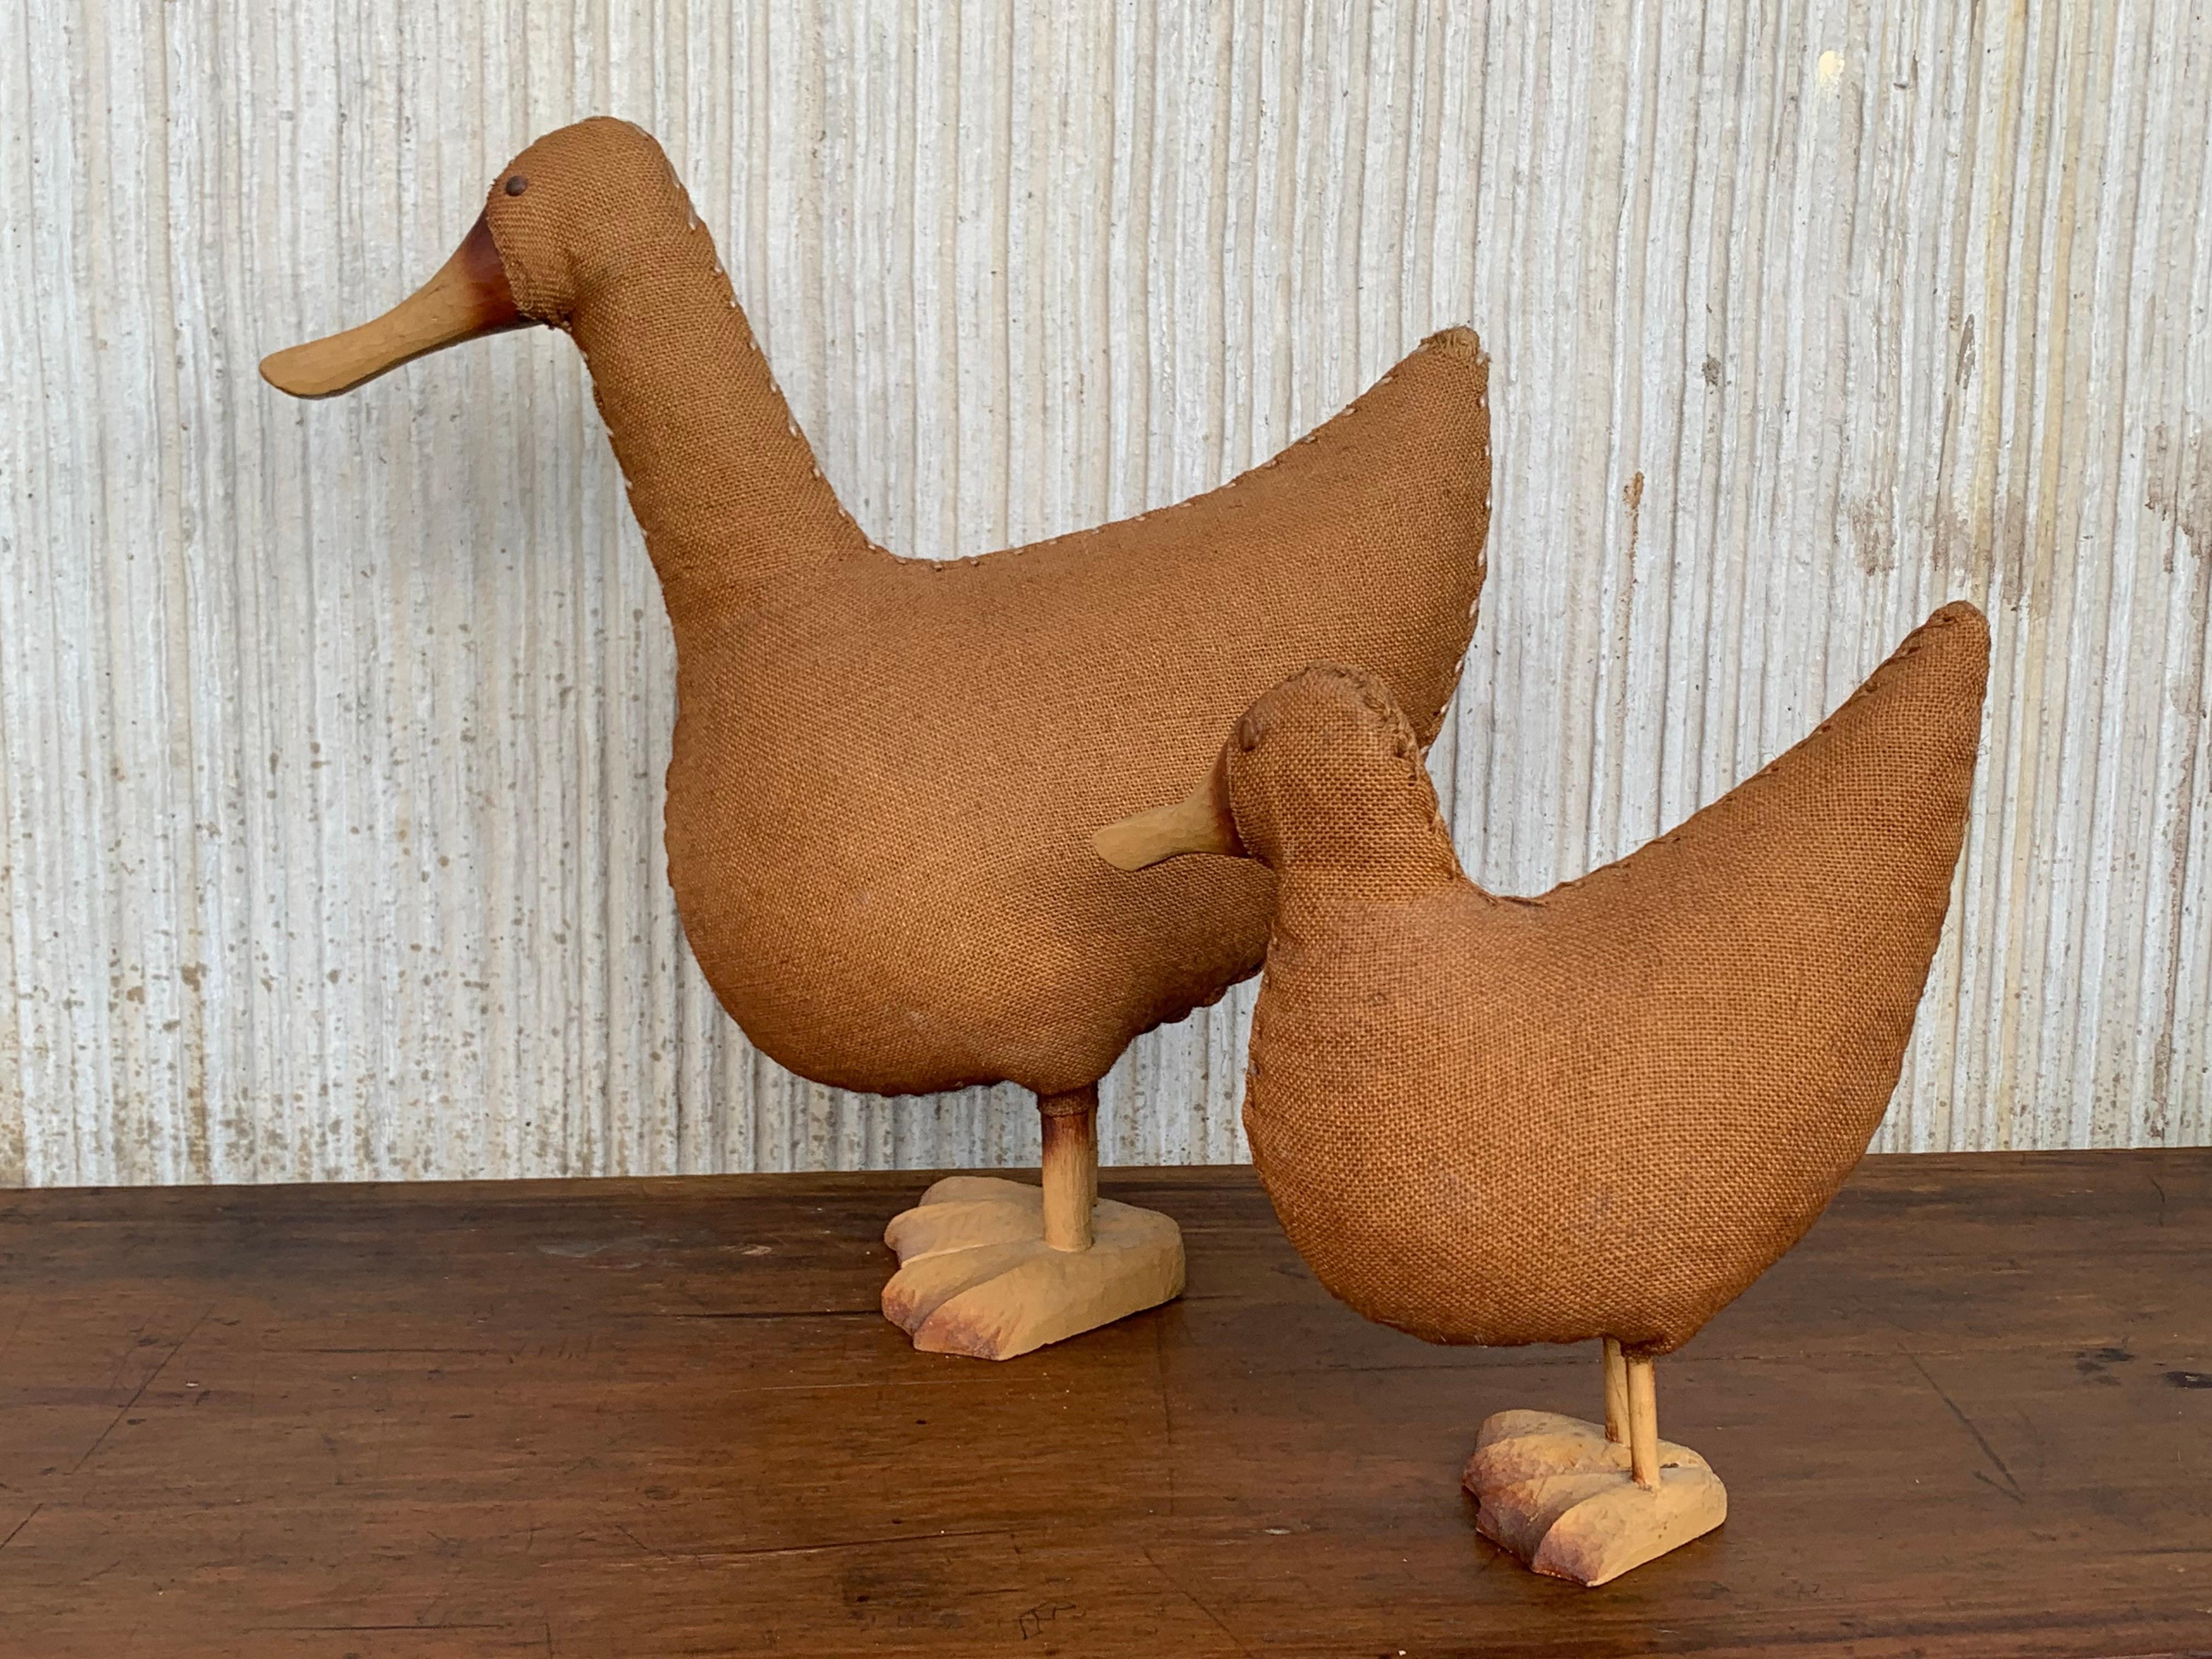 Spanish Midcentury Pair of Wicker Woven Ducks with Wood Details For Sale